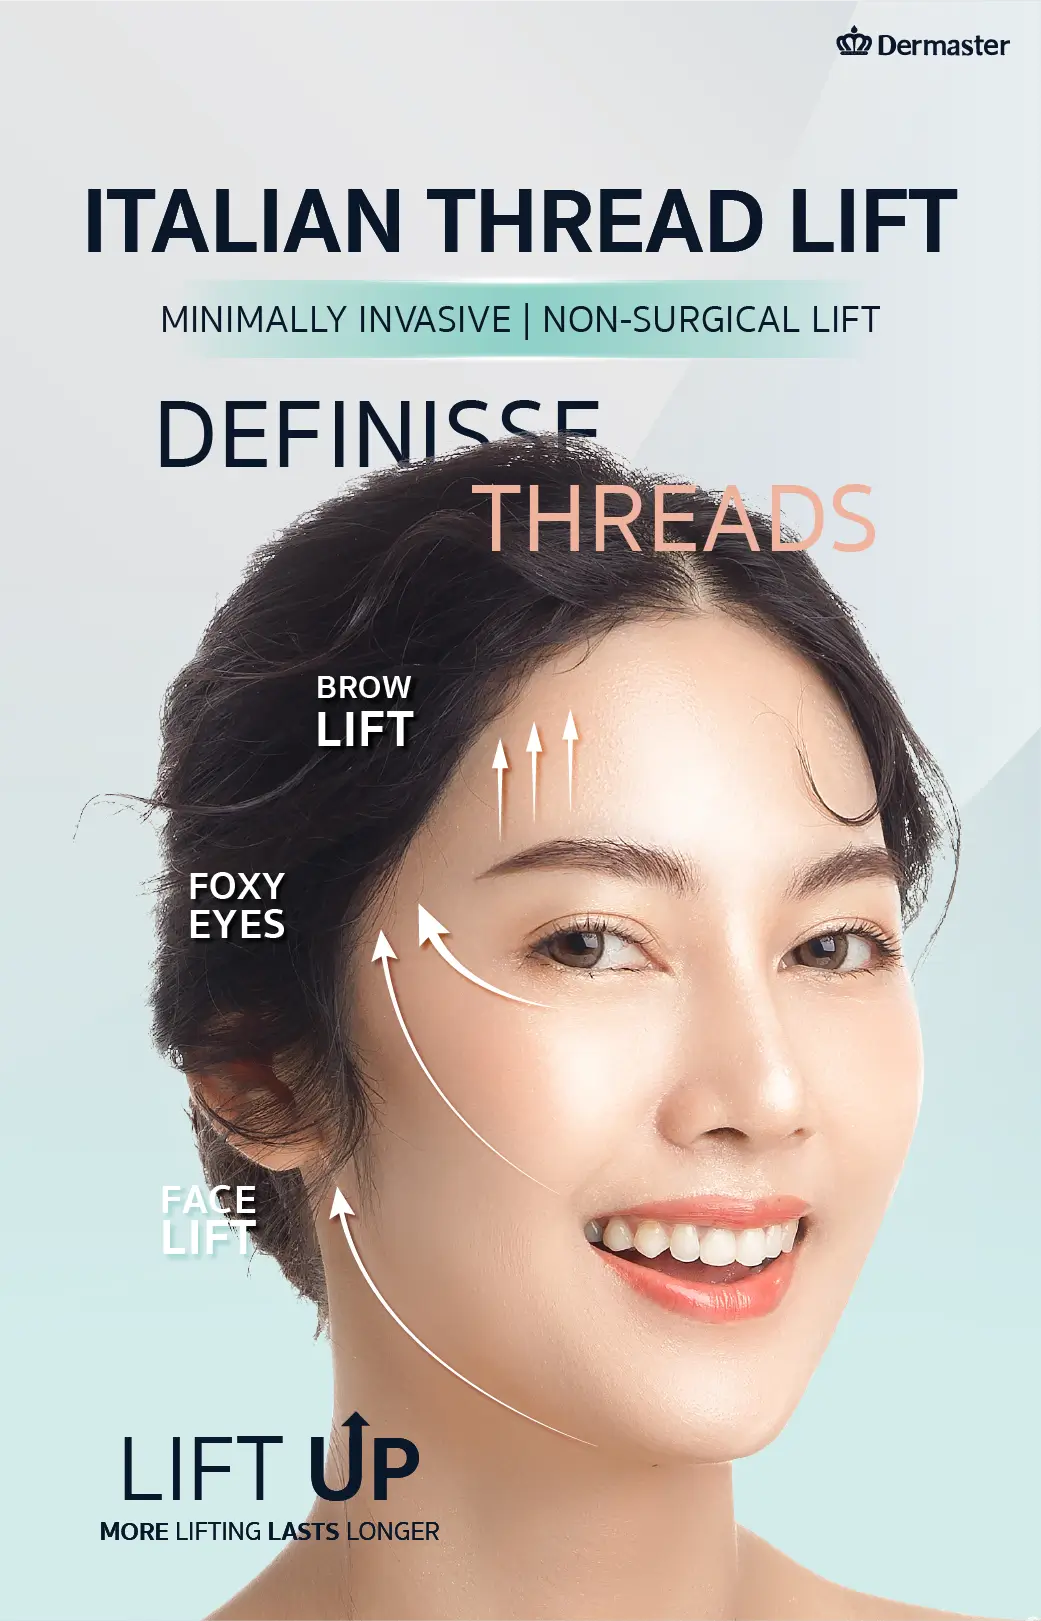 Image showing the key features of Italian Thread Lift (Definisse) on facial contouring